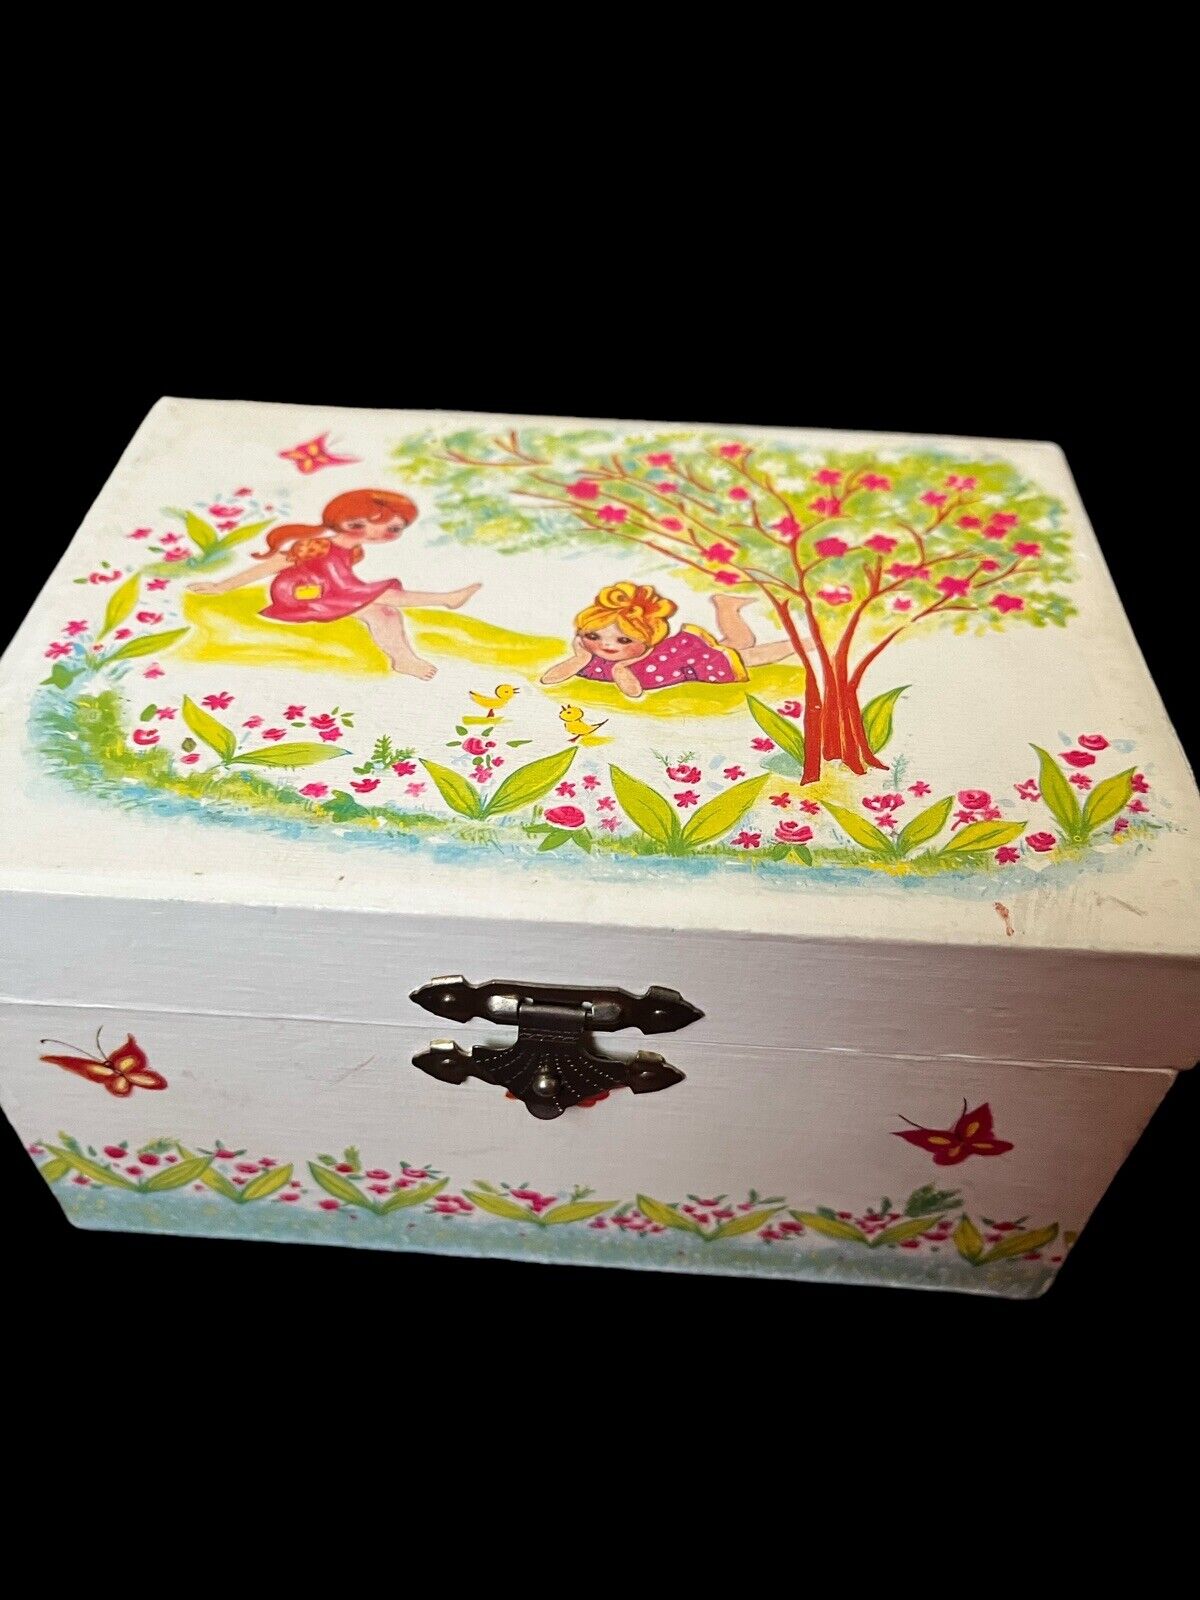 Vintage 70s 80s Musical Jewelry Box Spinning Ballerina Spring Girls Floral Kid\'s